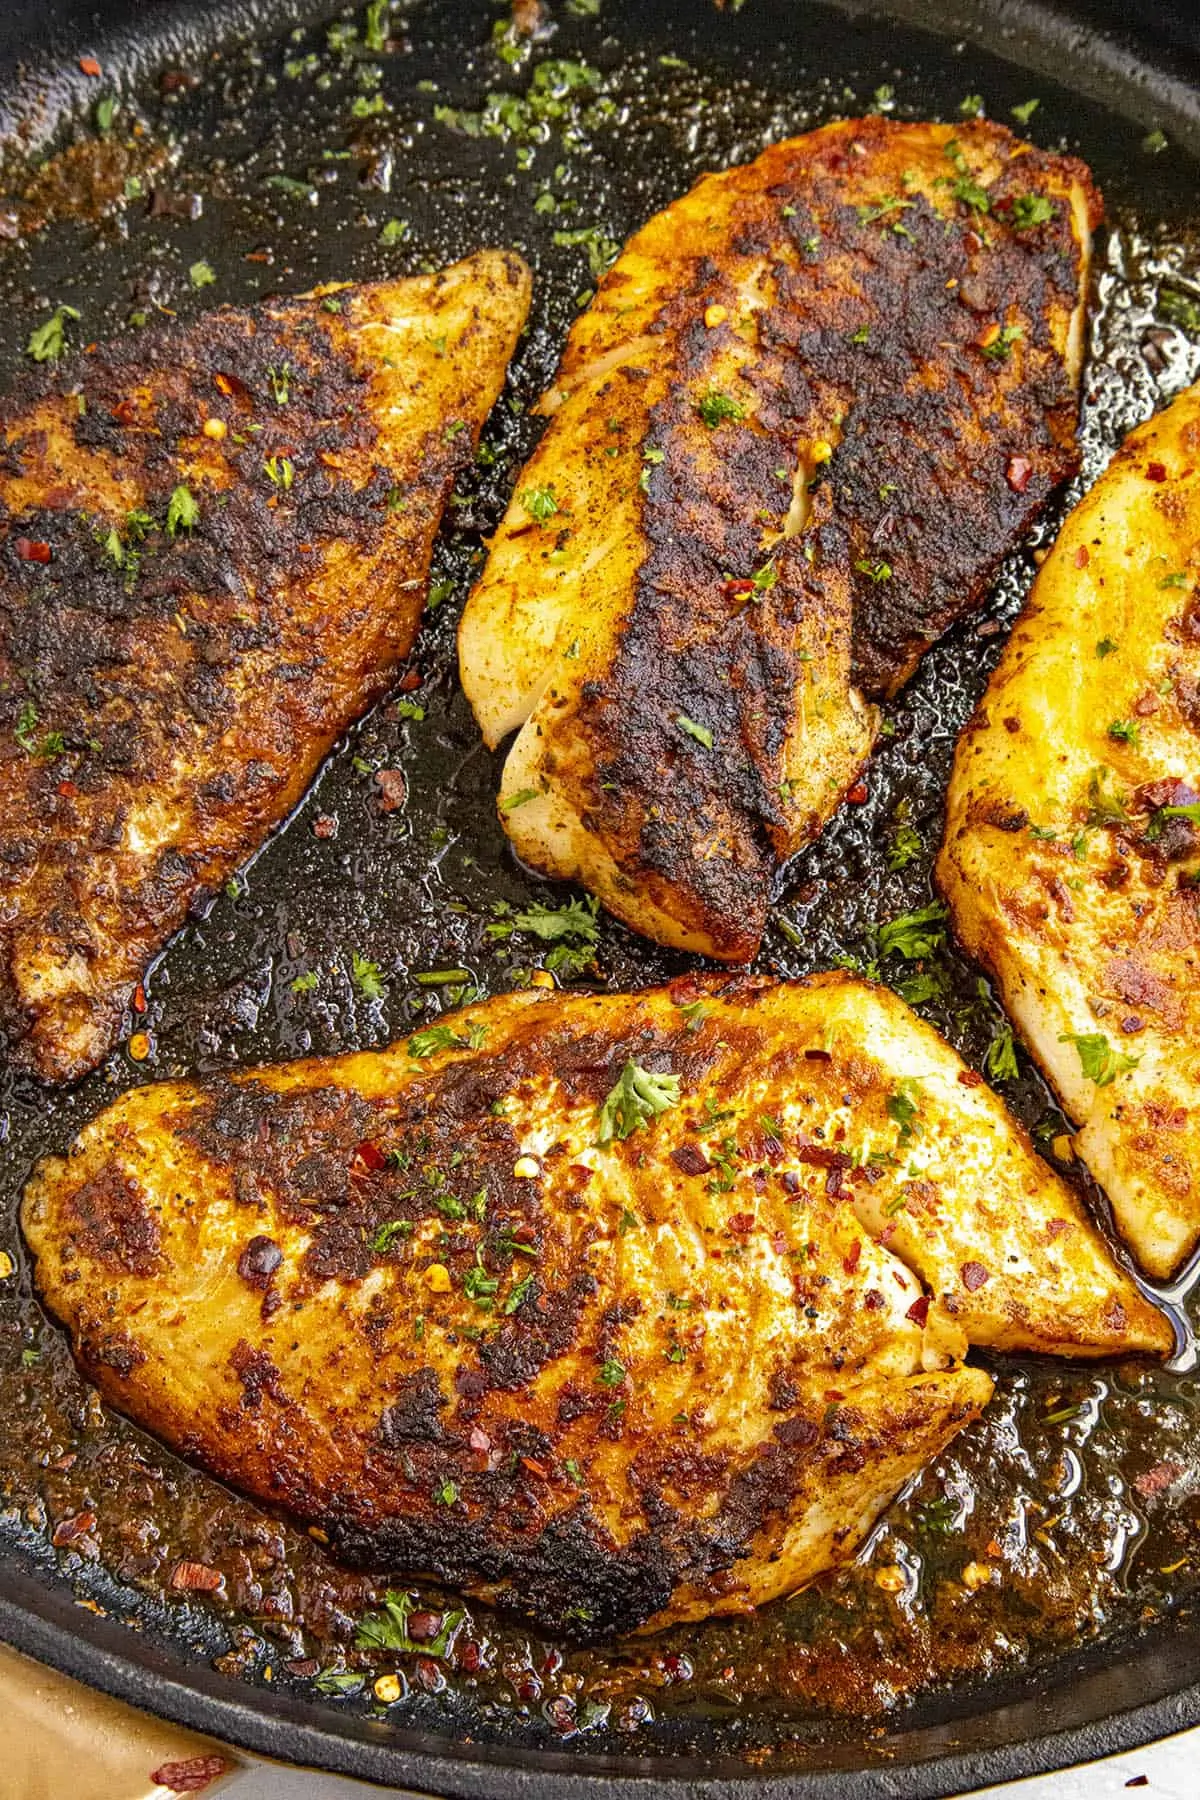 Blackened Fish served hot and ready.